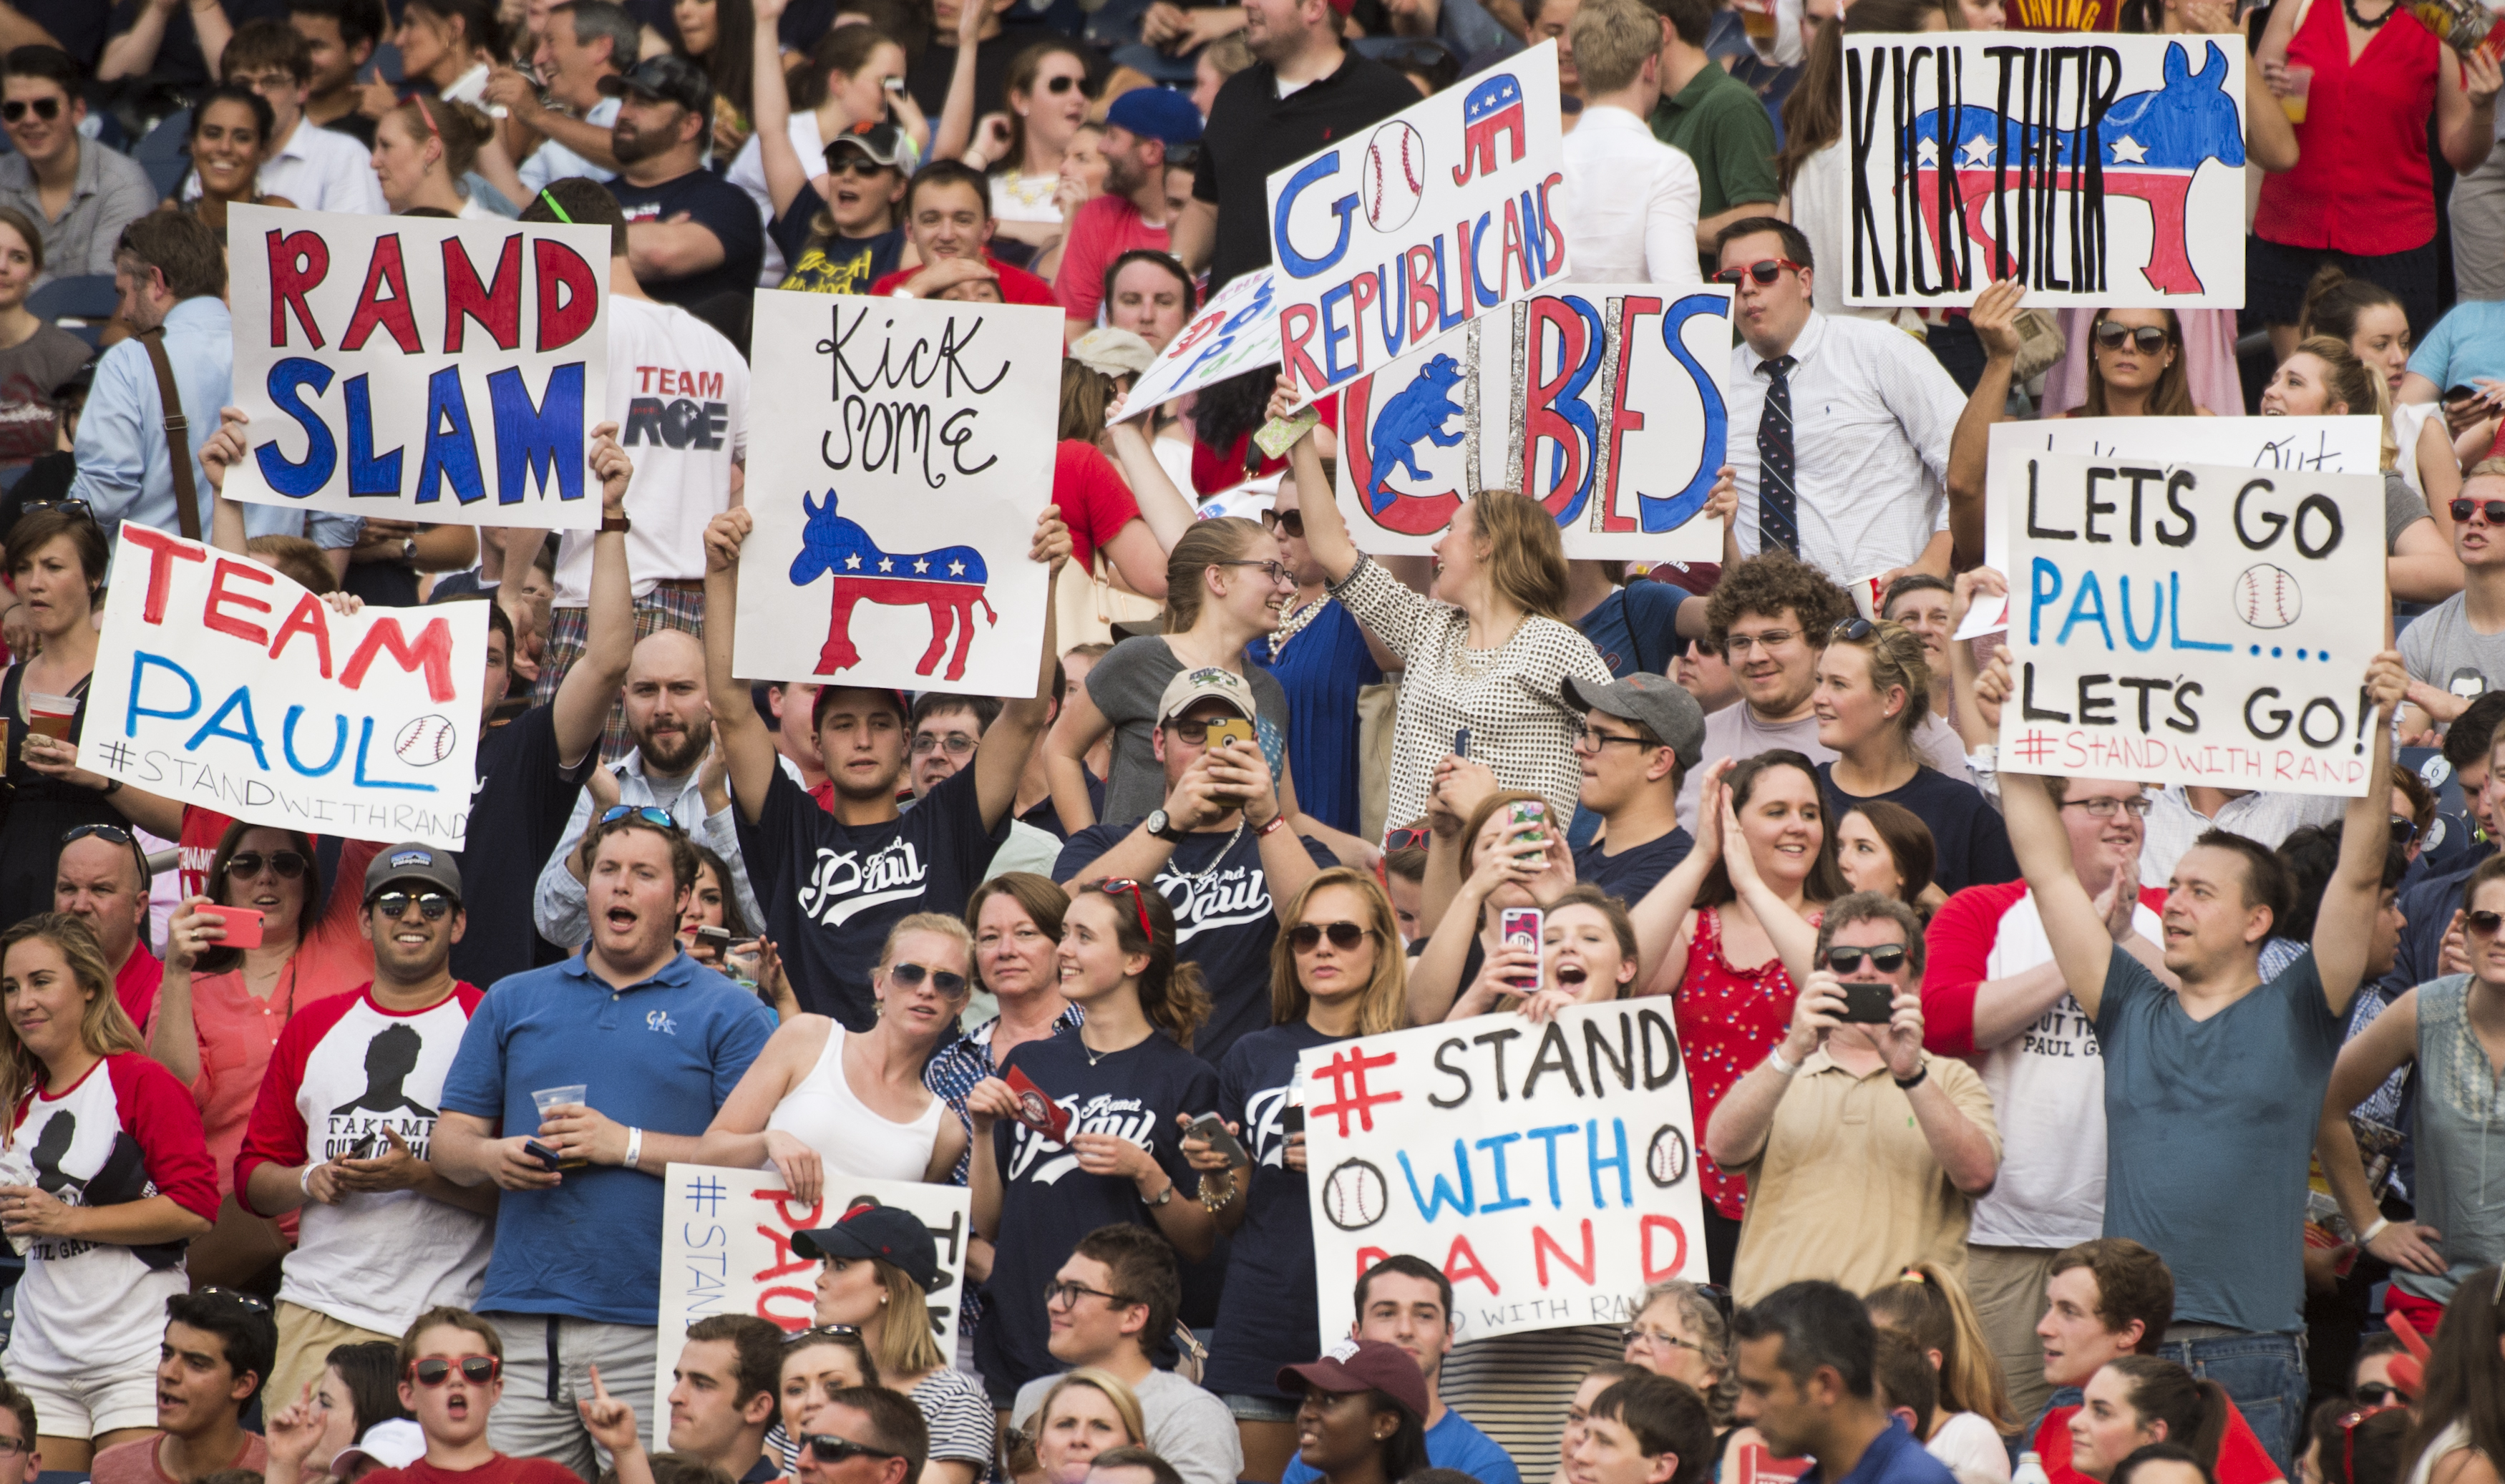 Sen. Rand Paul fans cheer and wave posters in the stands as Sen. Paul bats during the 54th Annual Roll Call Congressional Baseball Game at Nationals Park in Washington on June 11, 2015. The Democrats beat the Republicans 5-2. (Bill Clark—Getty Images)